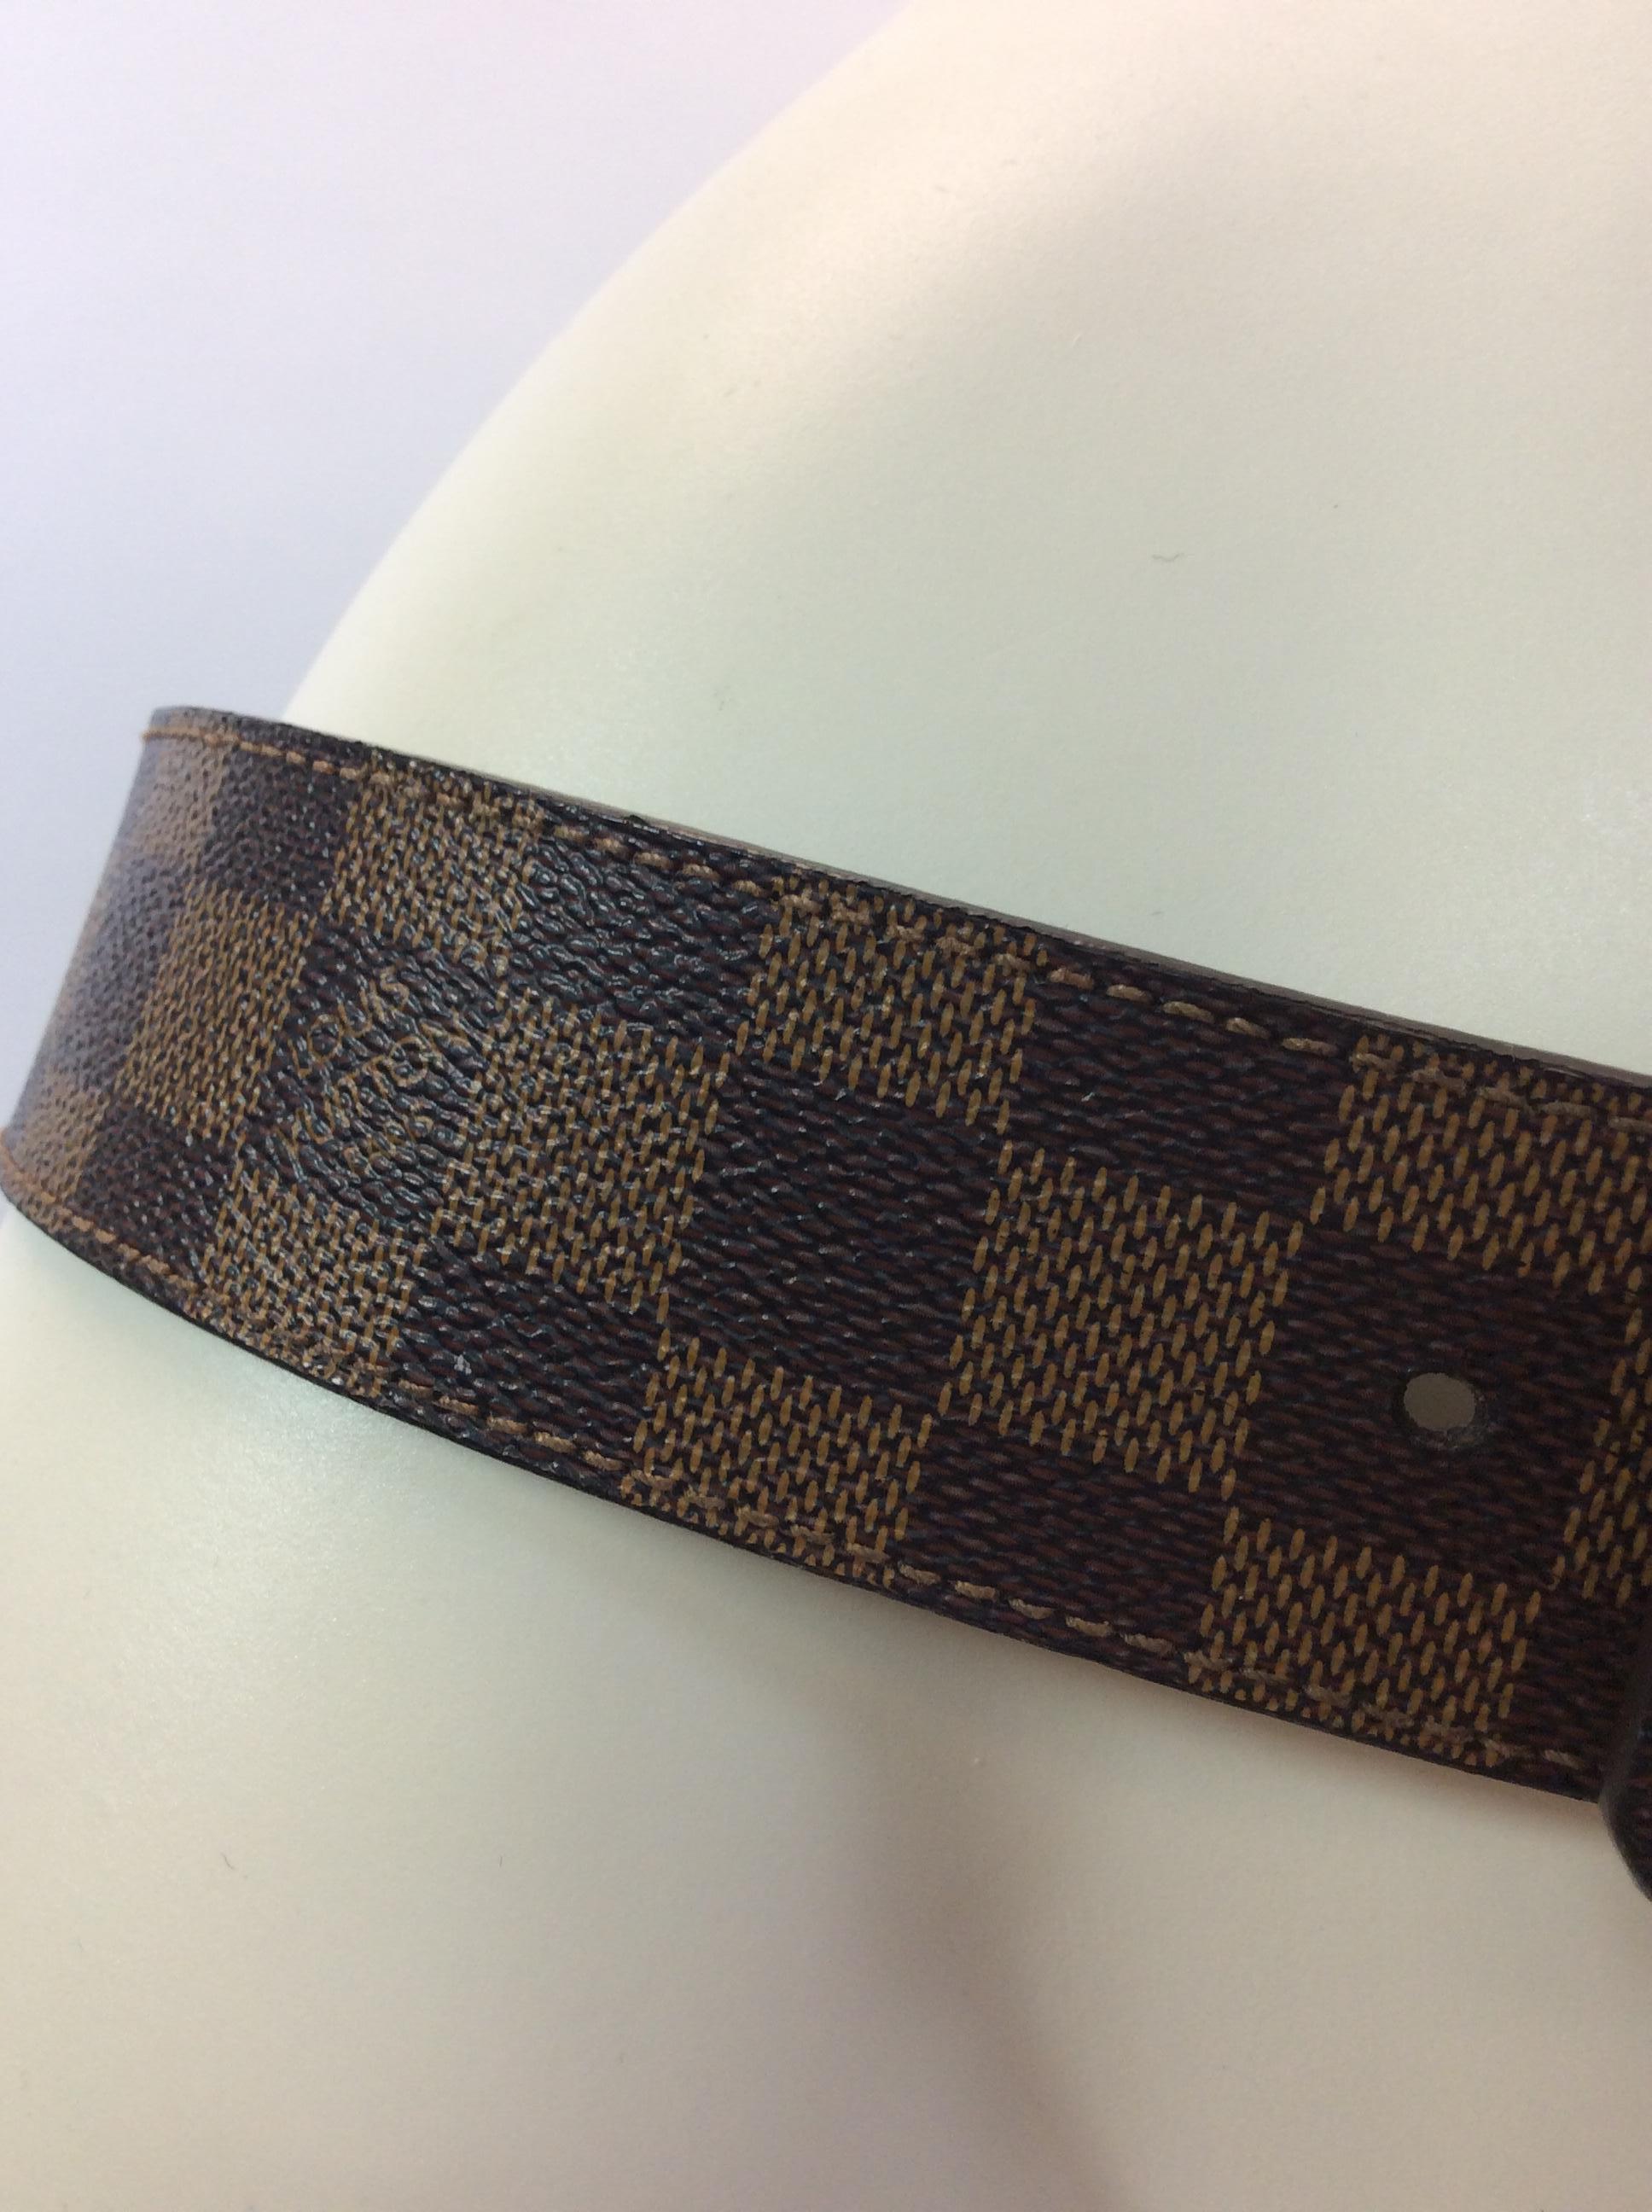 Louis Vuitton Ebene Initiales Belt In Good Condition For Sale In Narberth, PA